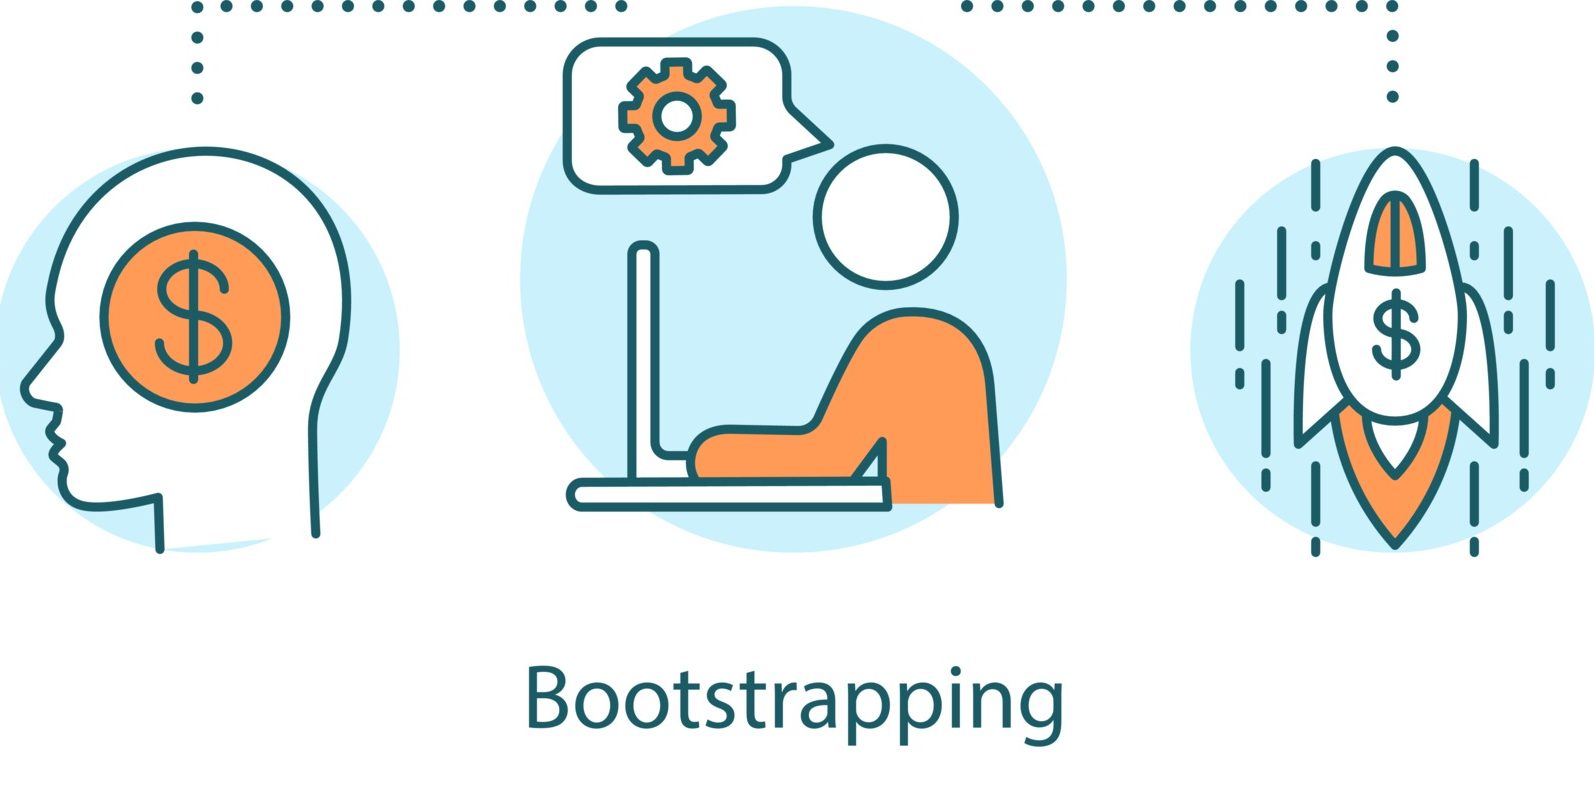 bootstrapping to success image